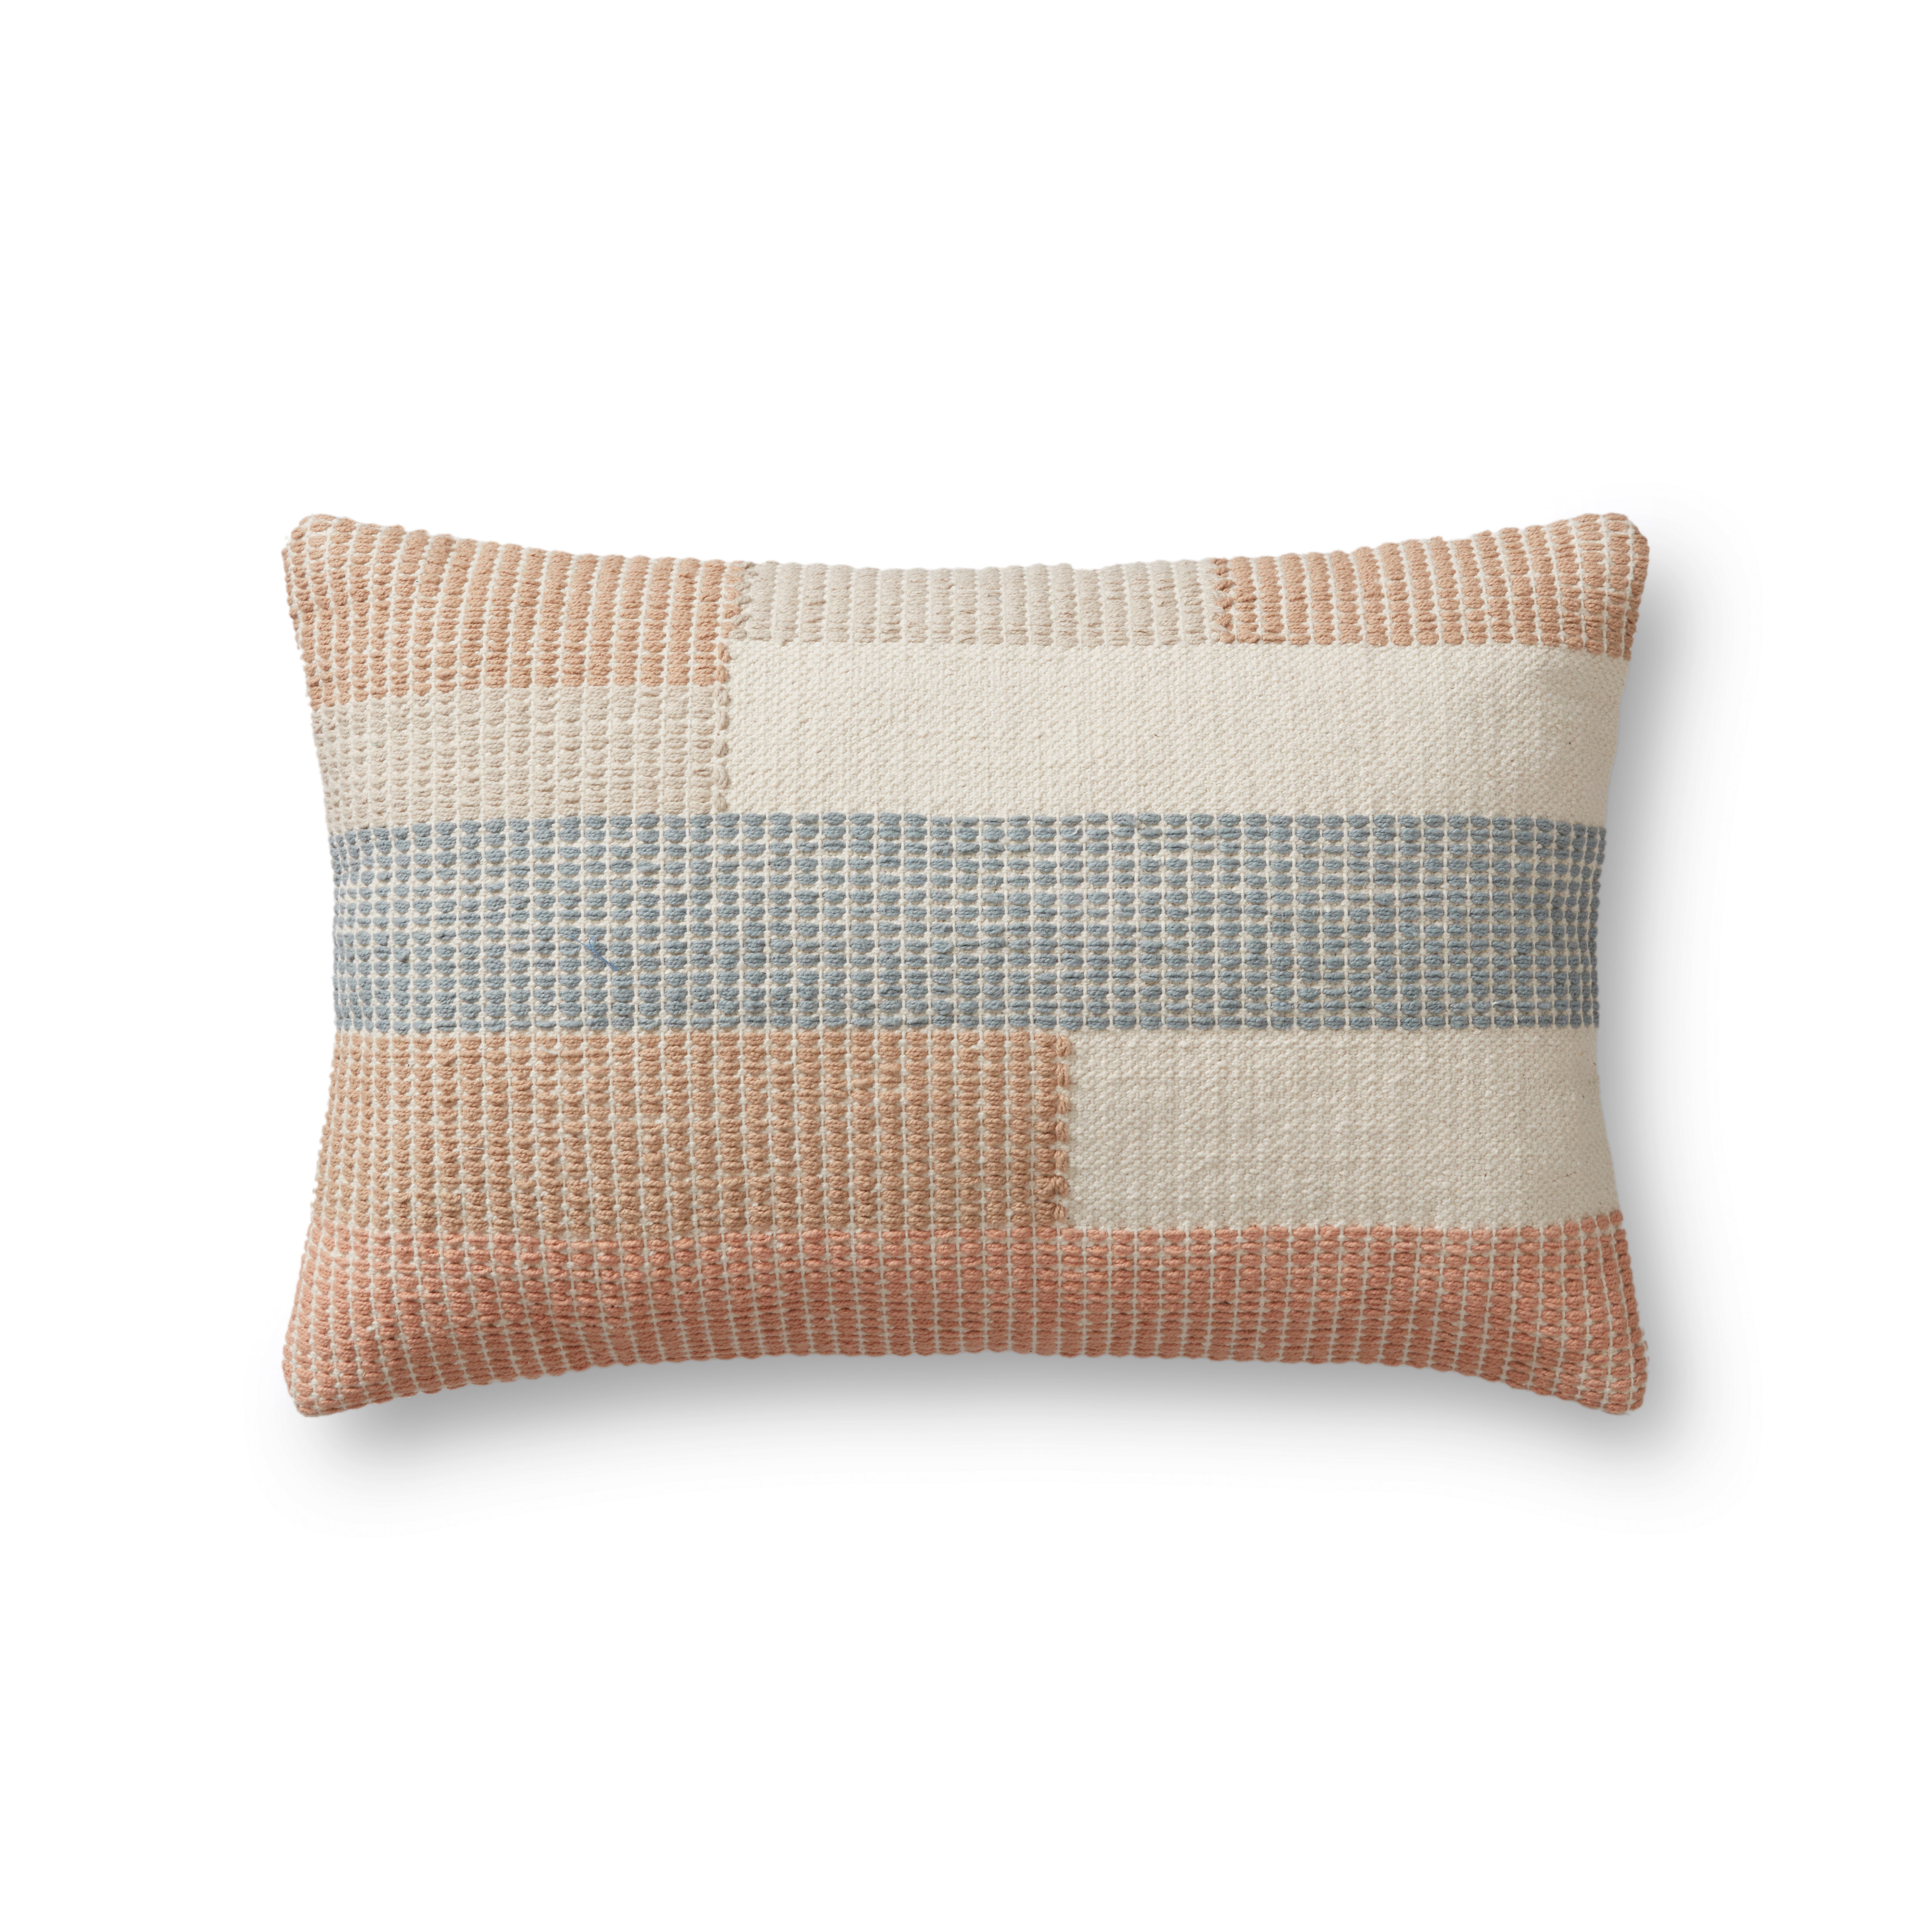 PILLOWS P1170 MULTI 13" x 21" Cover w/Poly - Magnolia Home by Joana Gaines Crafted by Loloi Rugs